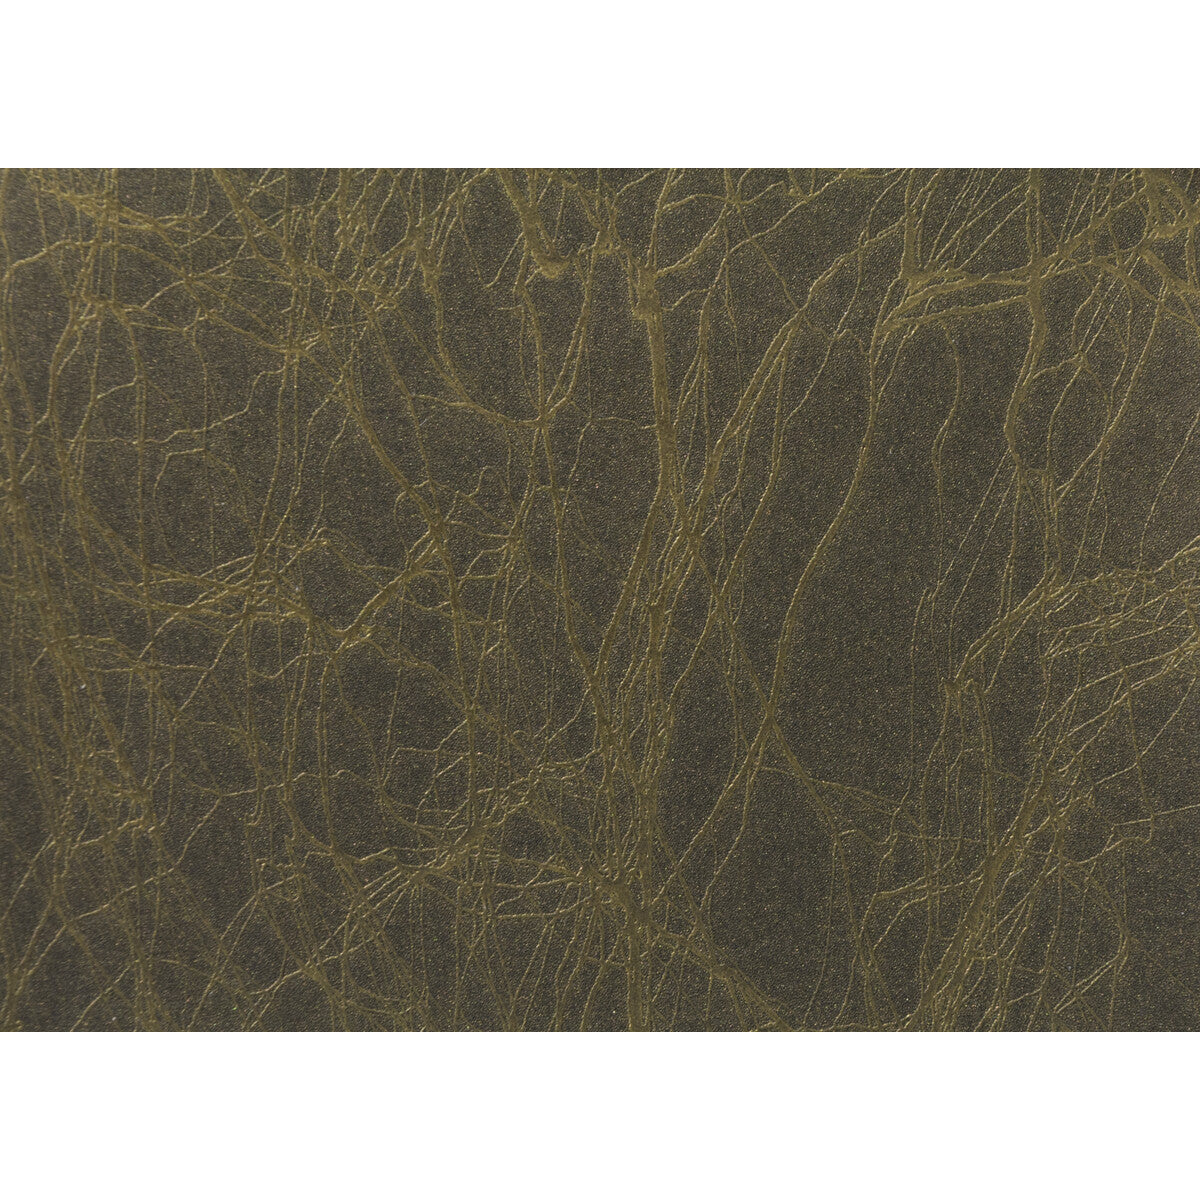 Marbleized fabric in bronze color - pattern MARBLEIZED.4.0 - by Kravet Couture